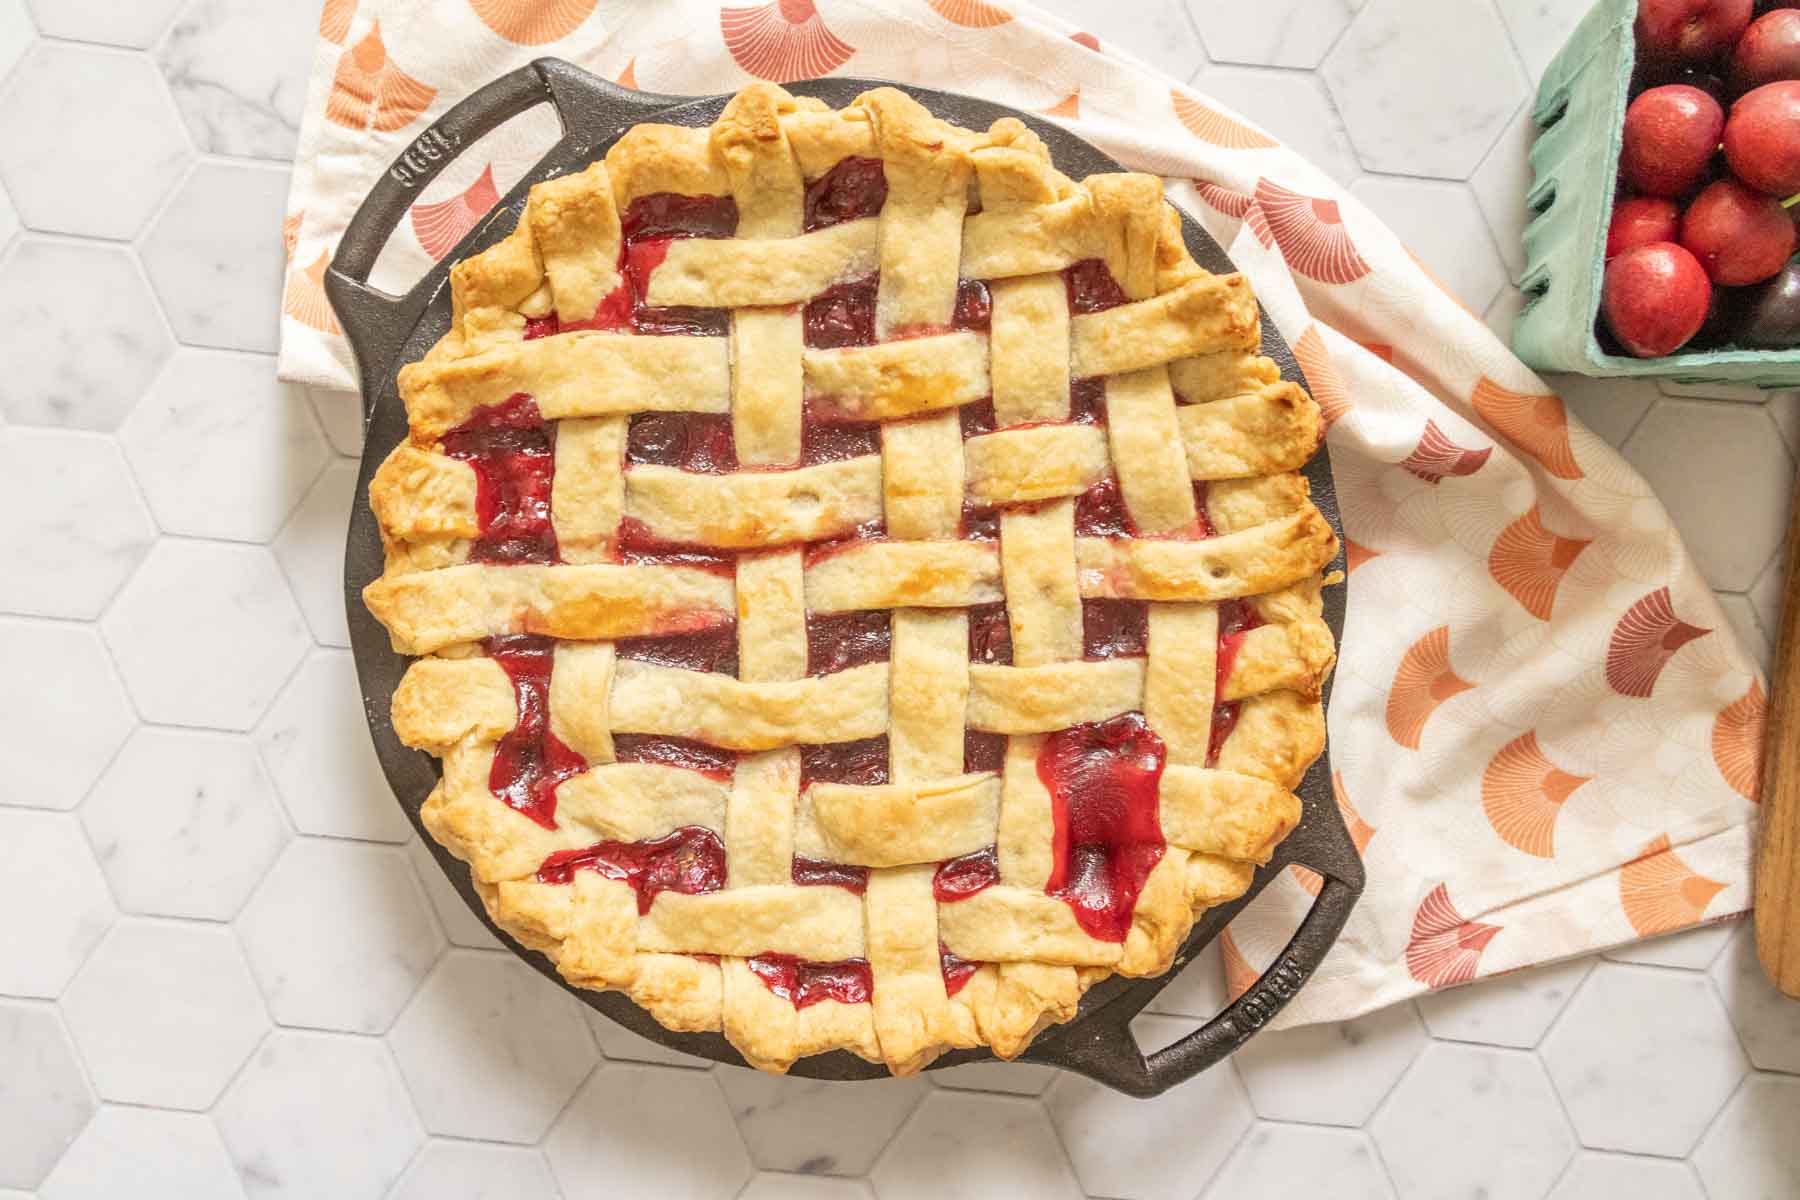 Overhead cherry pie on a tile surface with a patterned napkin.